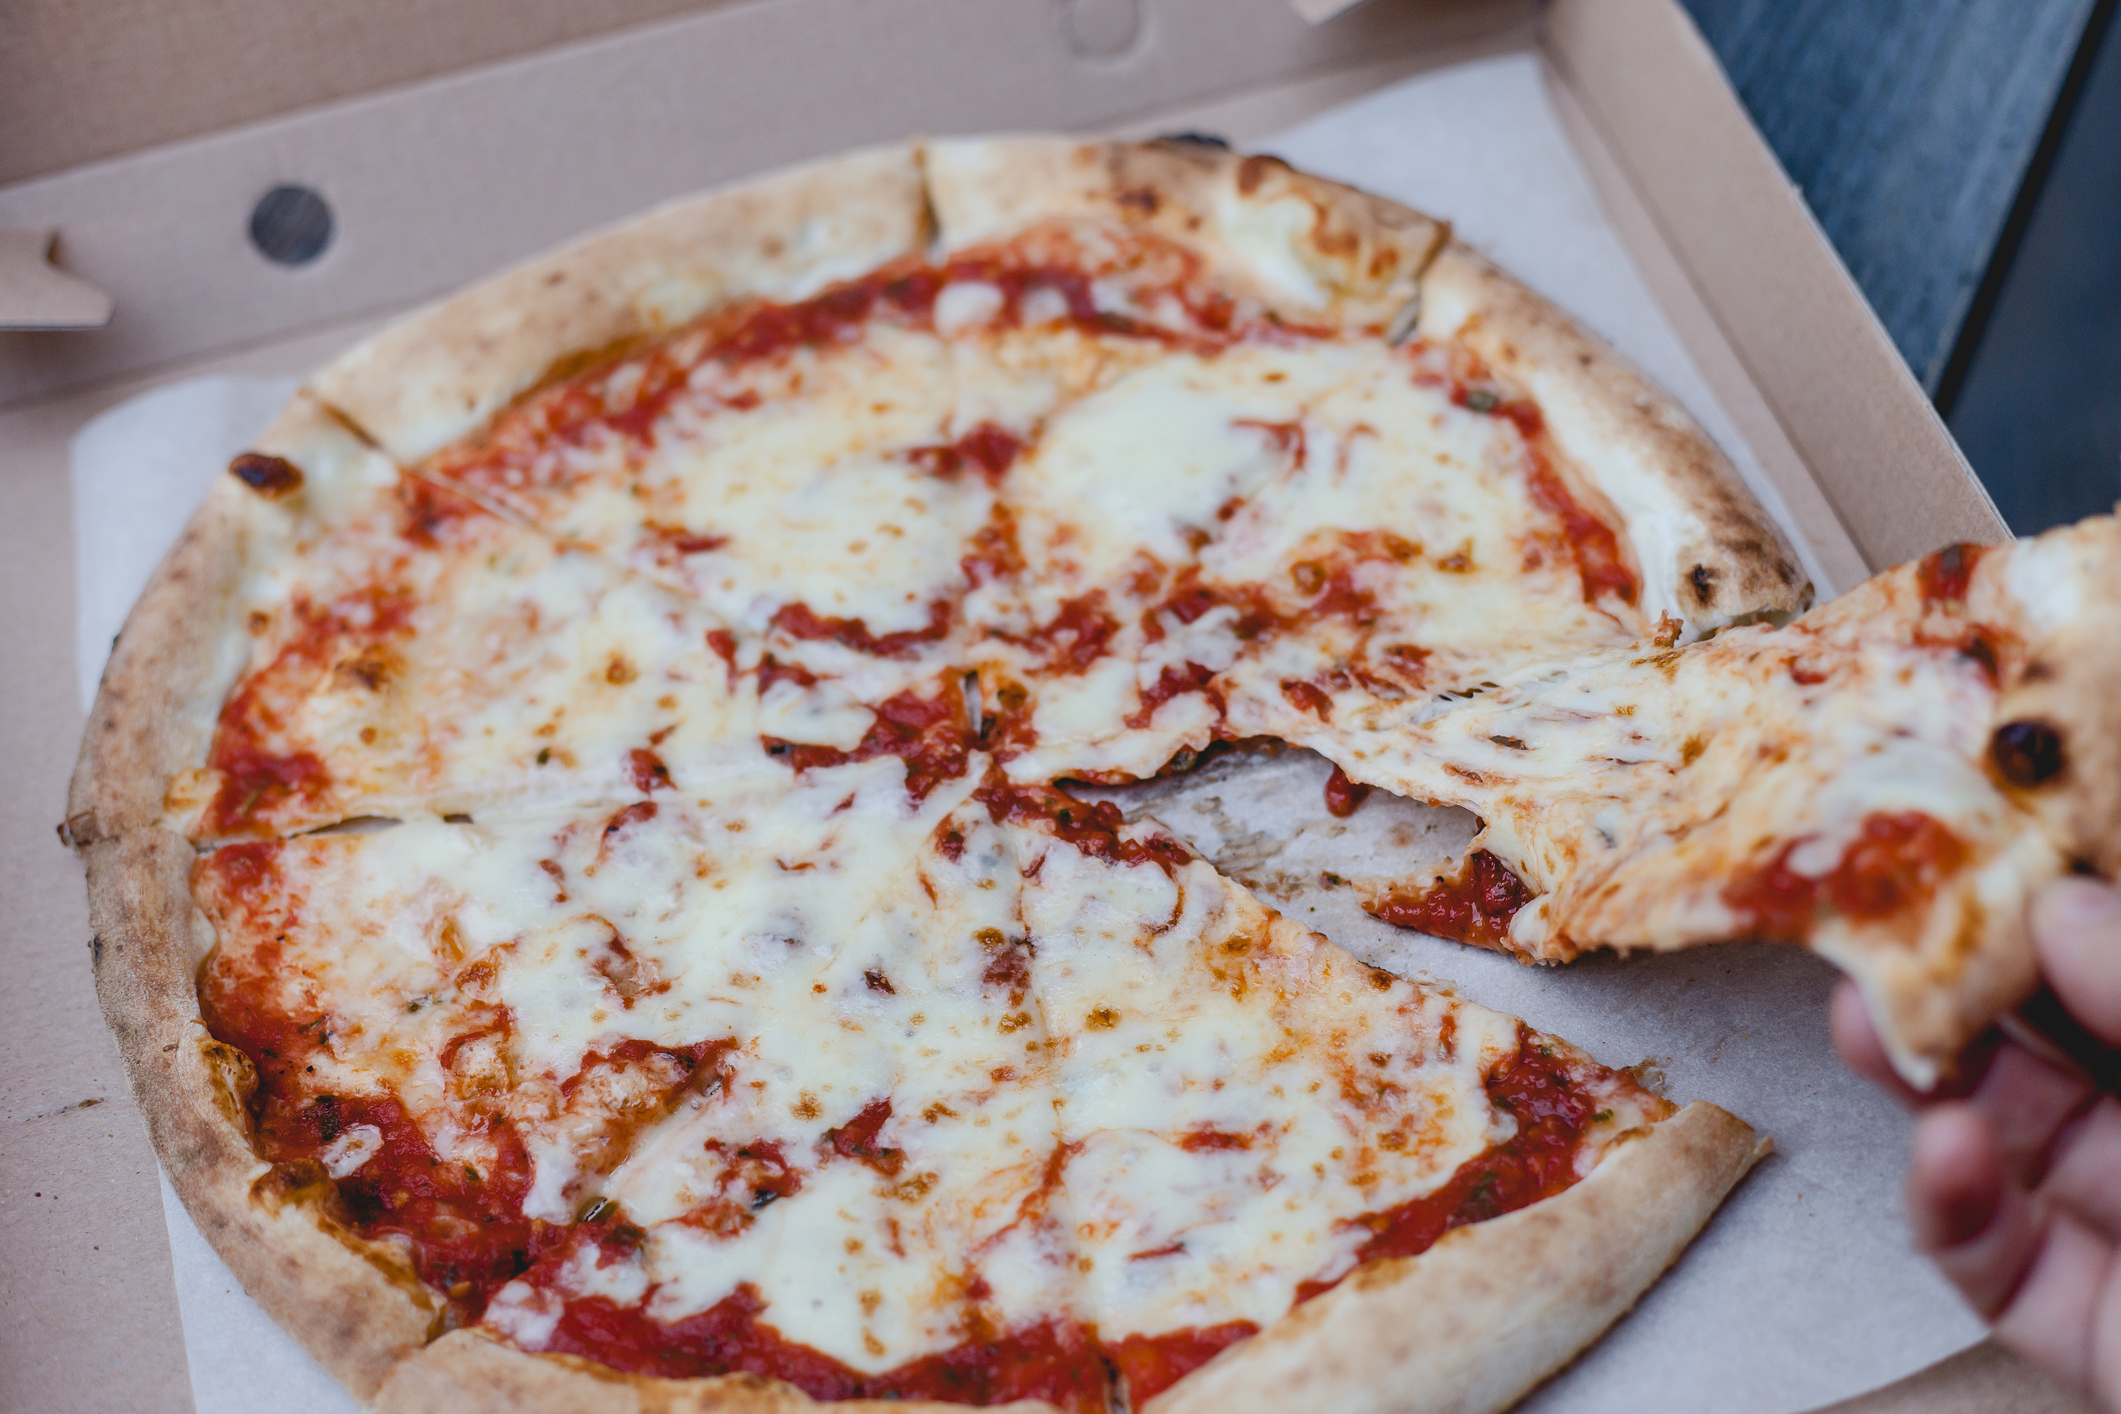 A cheese pizza with one slice partly removed, with hand holding the slice